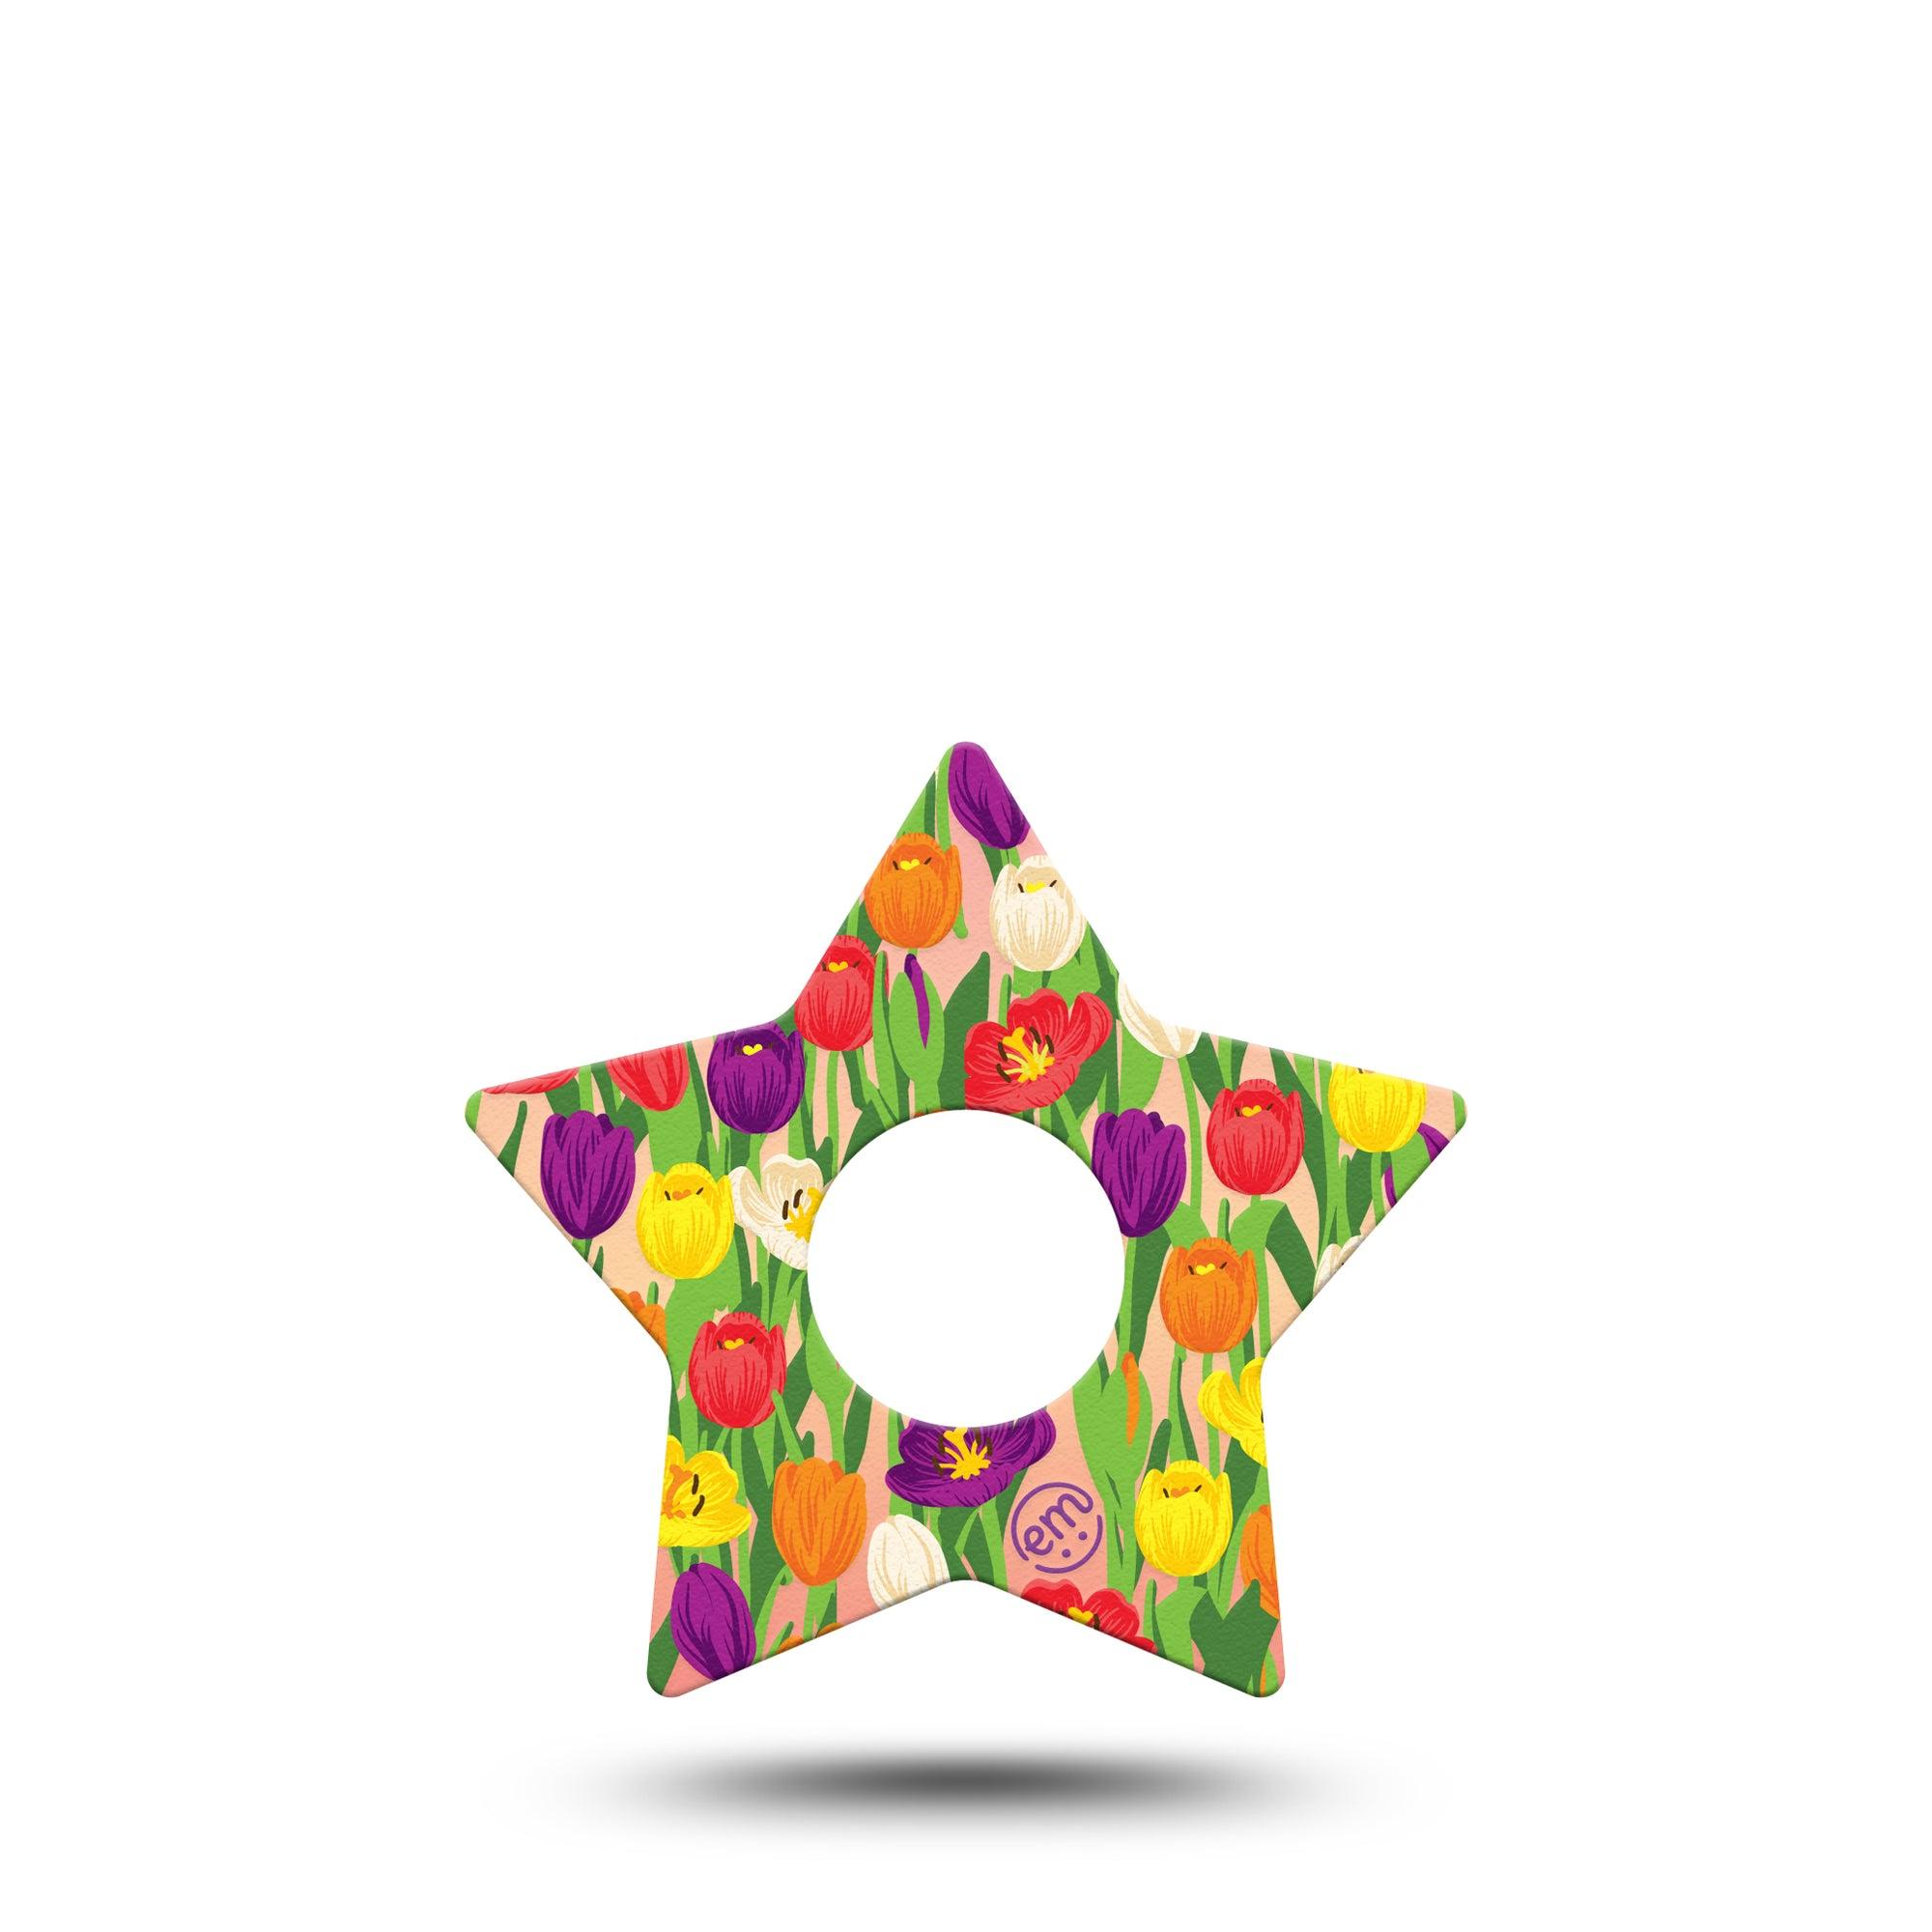 ExpressionMed Tulips Star Libre 3 Tape, Single, Spring Flowerets Themed, CGM Overlay Patch Design